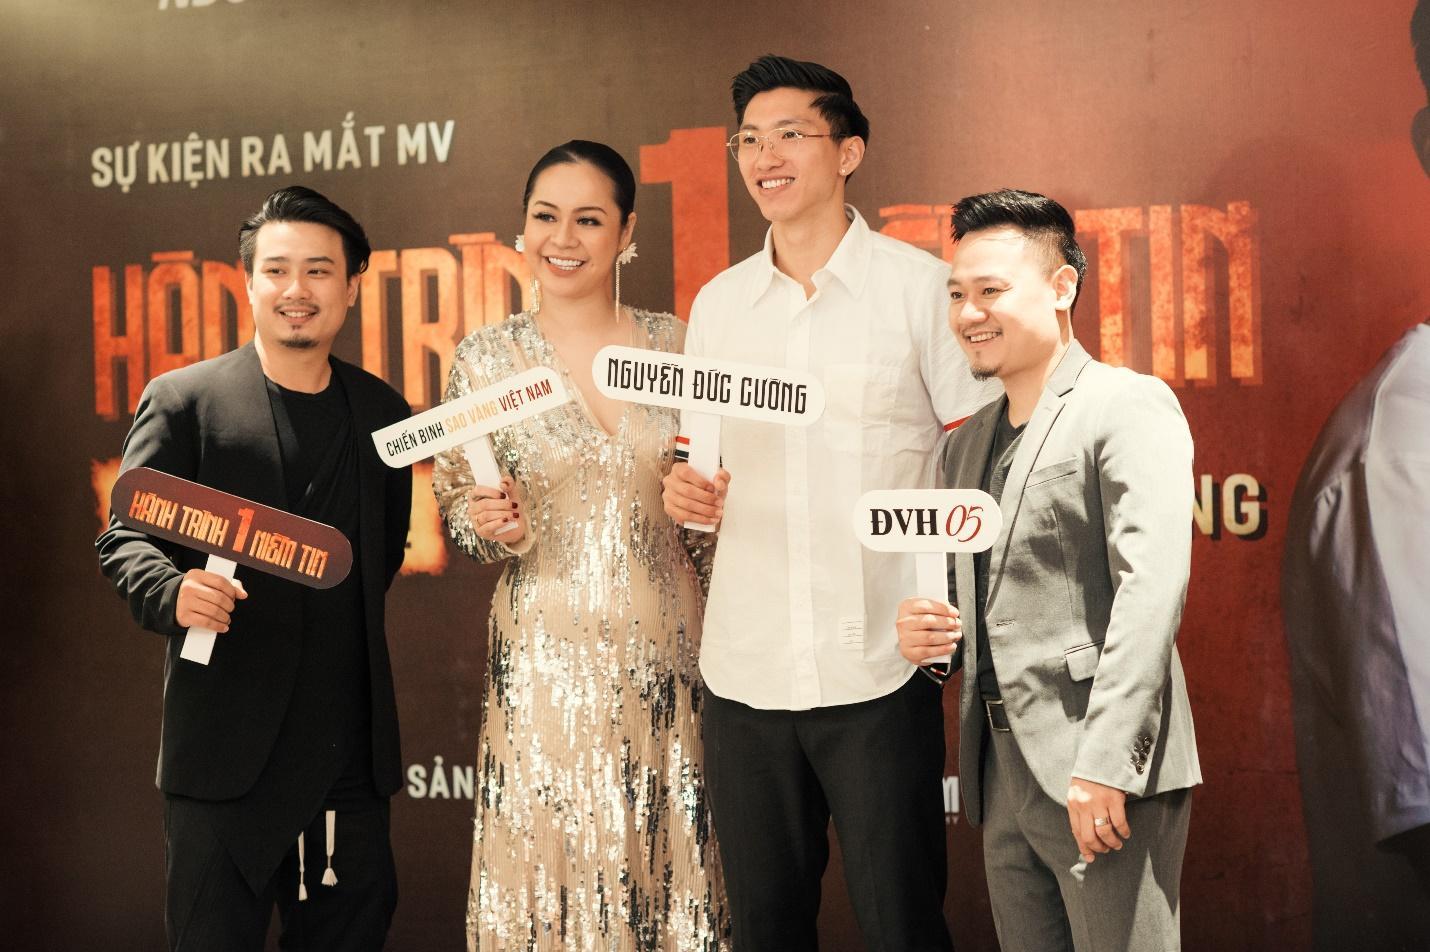 Doan Van Hau was present at The One to support musician Nguyen Duc Cuong to launch the MV Journey of 1 Faith - Photo 2.